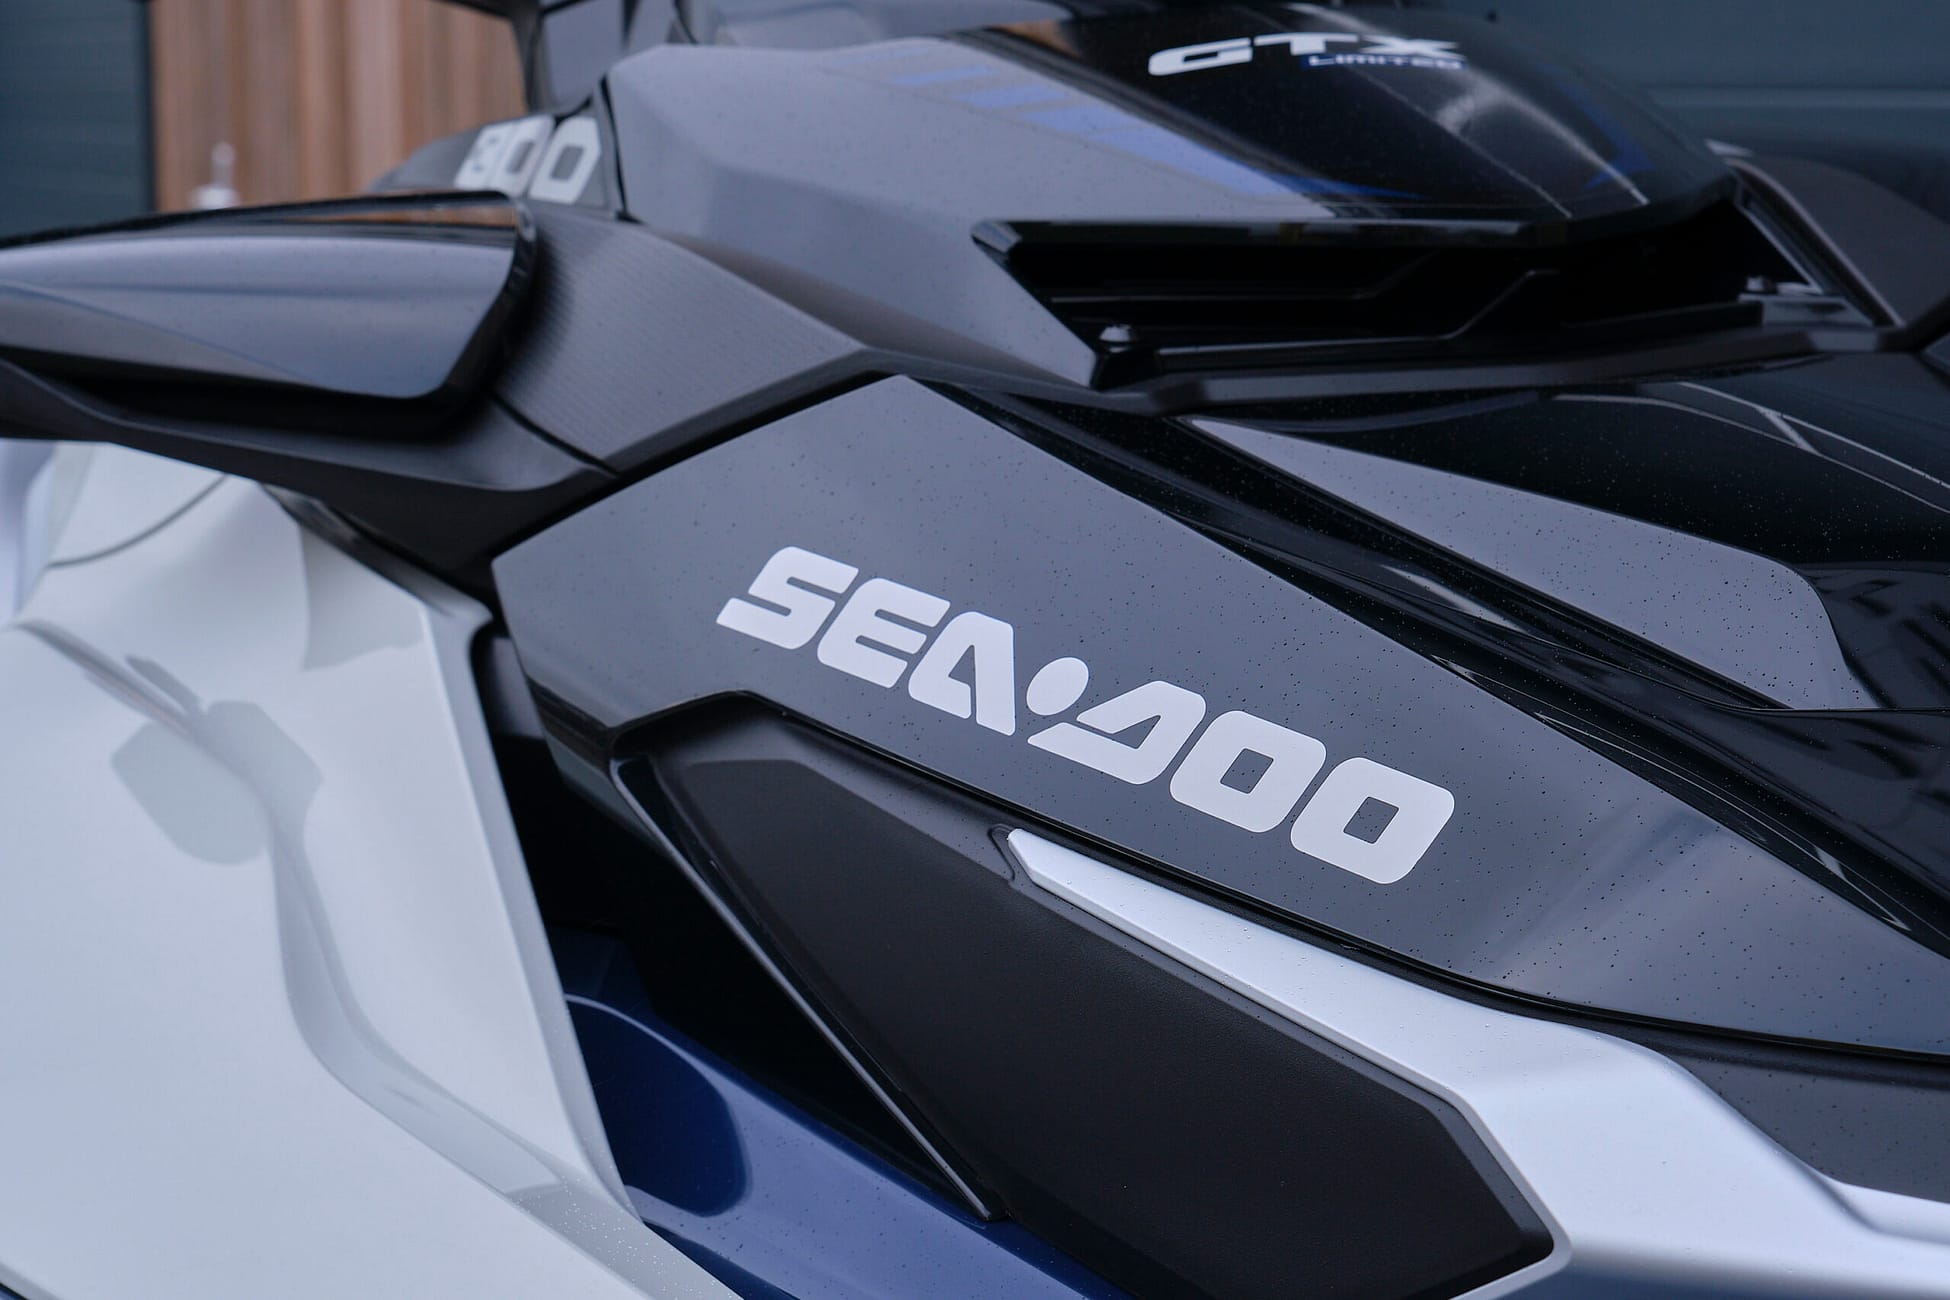 Sea-Doo GTX Limited 300 Blue Abyss